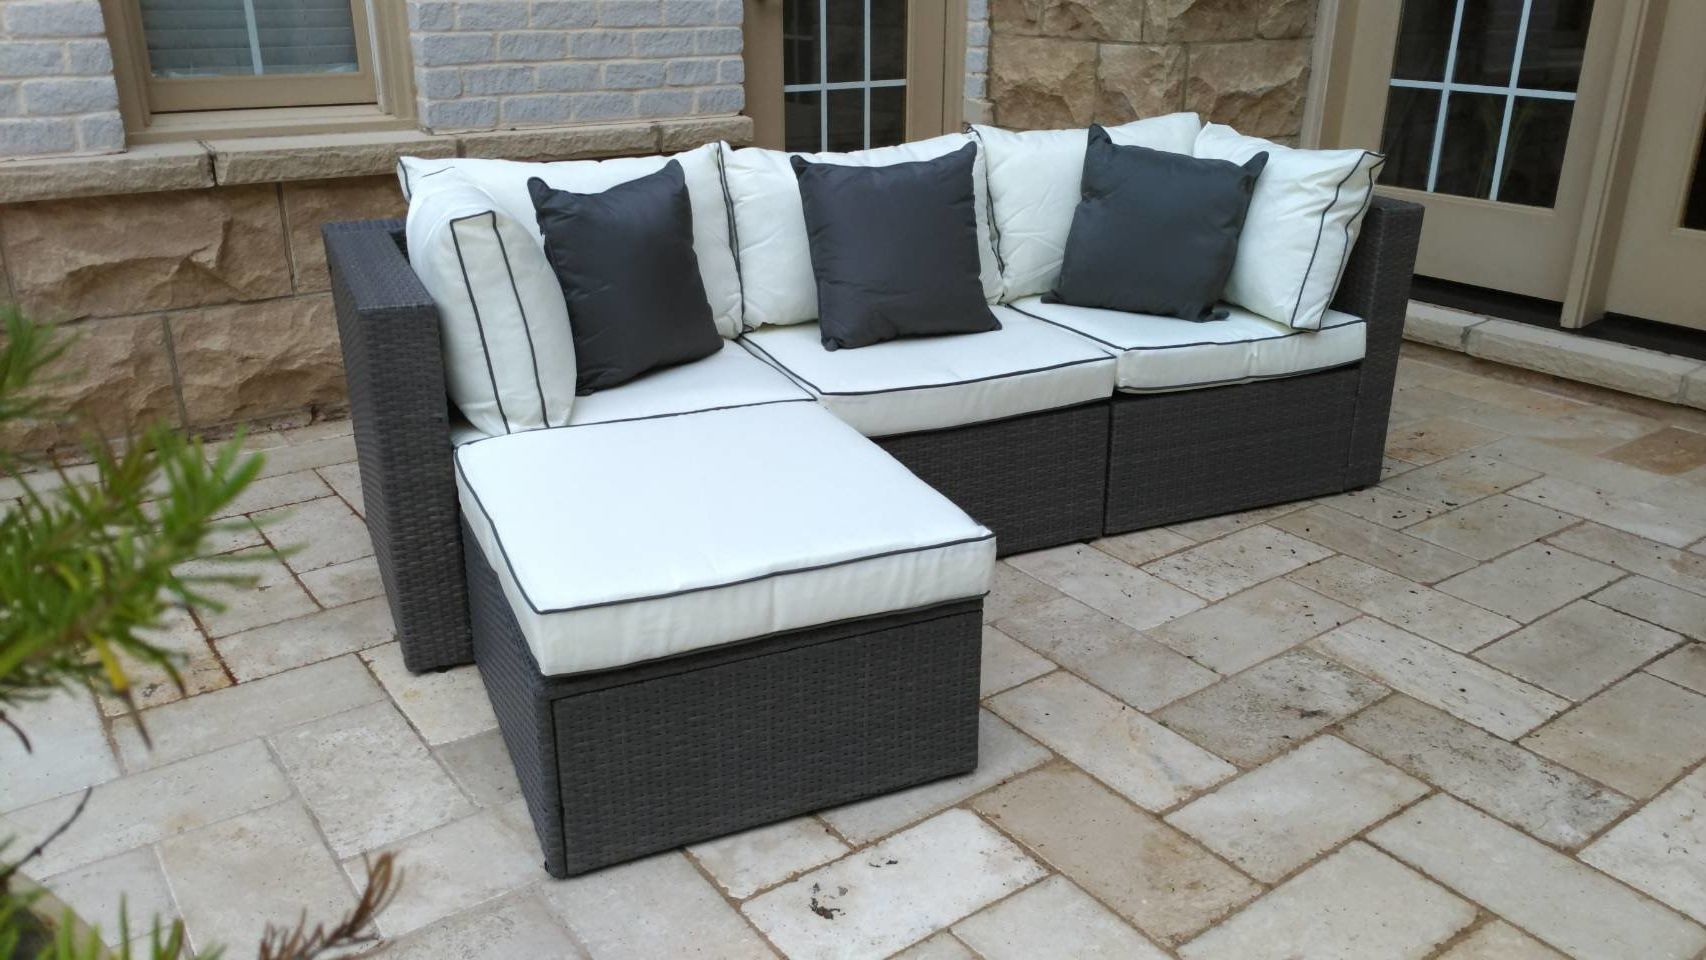 Three Posts Burruss Patio Sectional With Cushions Inside Most Current Madison Avenue Patio Sectionals With Sunbrella Cushions (View 12 of 20)